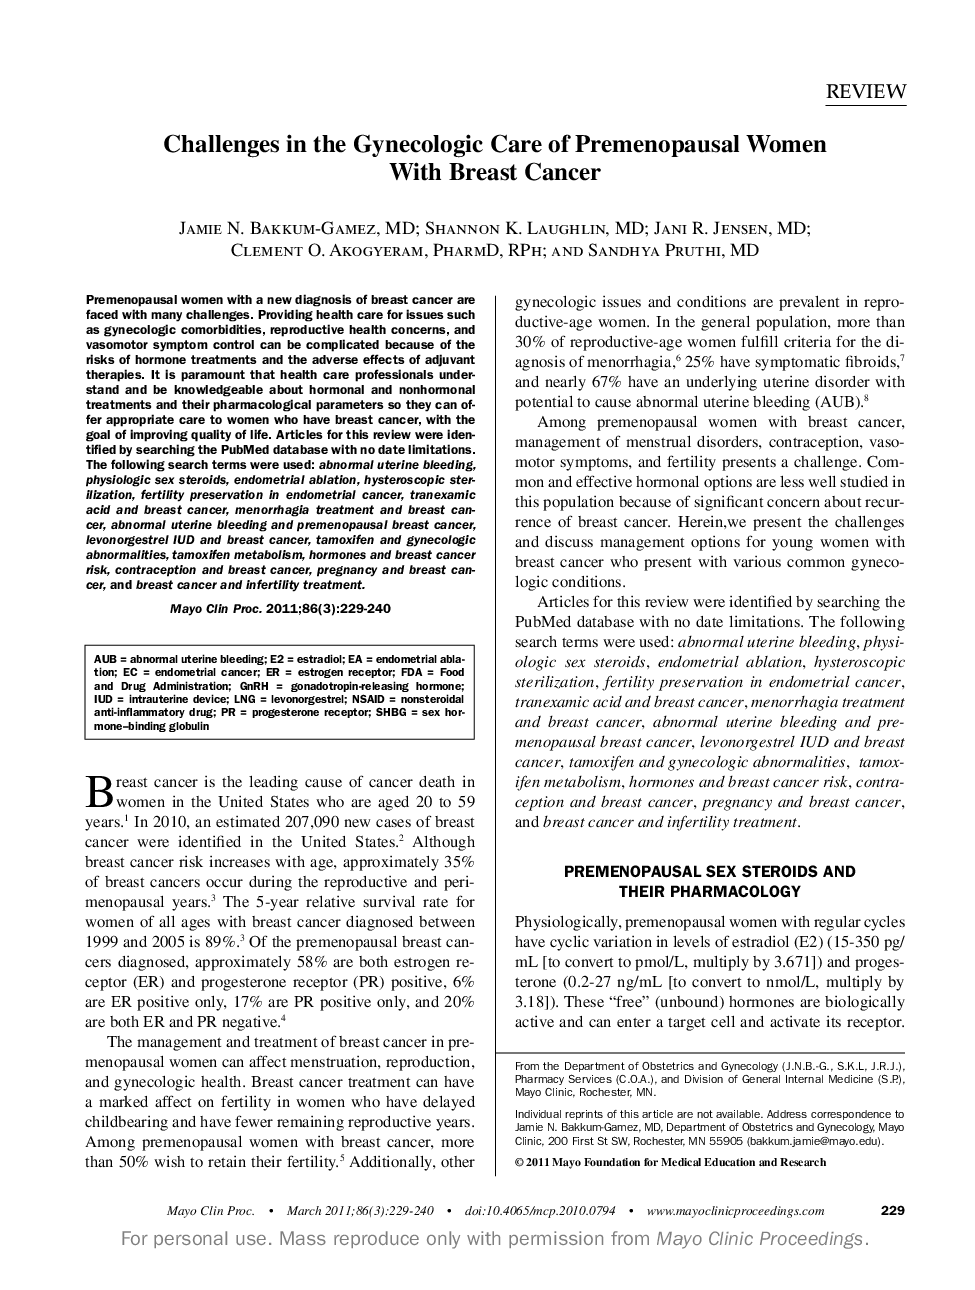 Challenges in the Gynecologic Care of Premenopausal Women With Breast Cancer